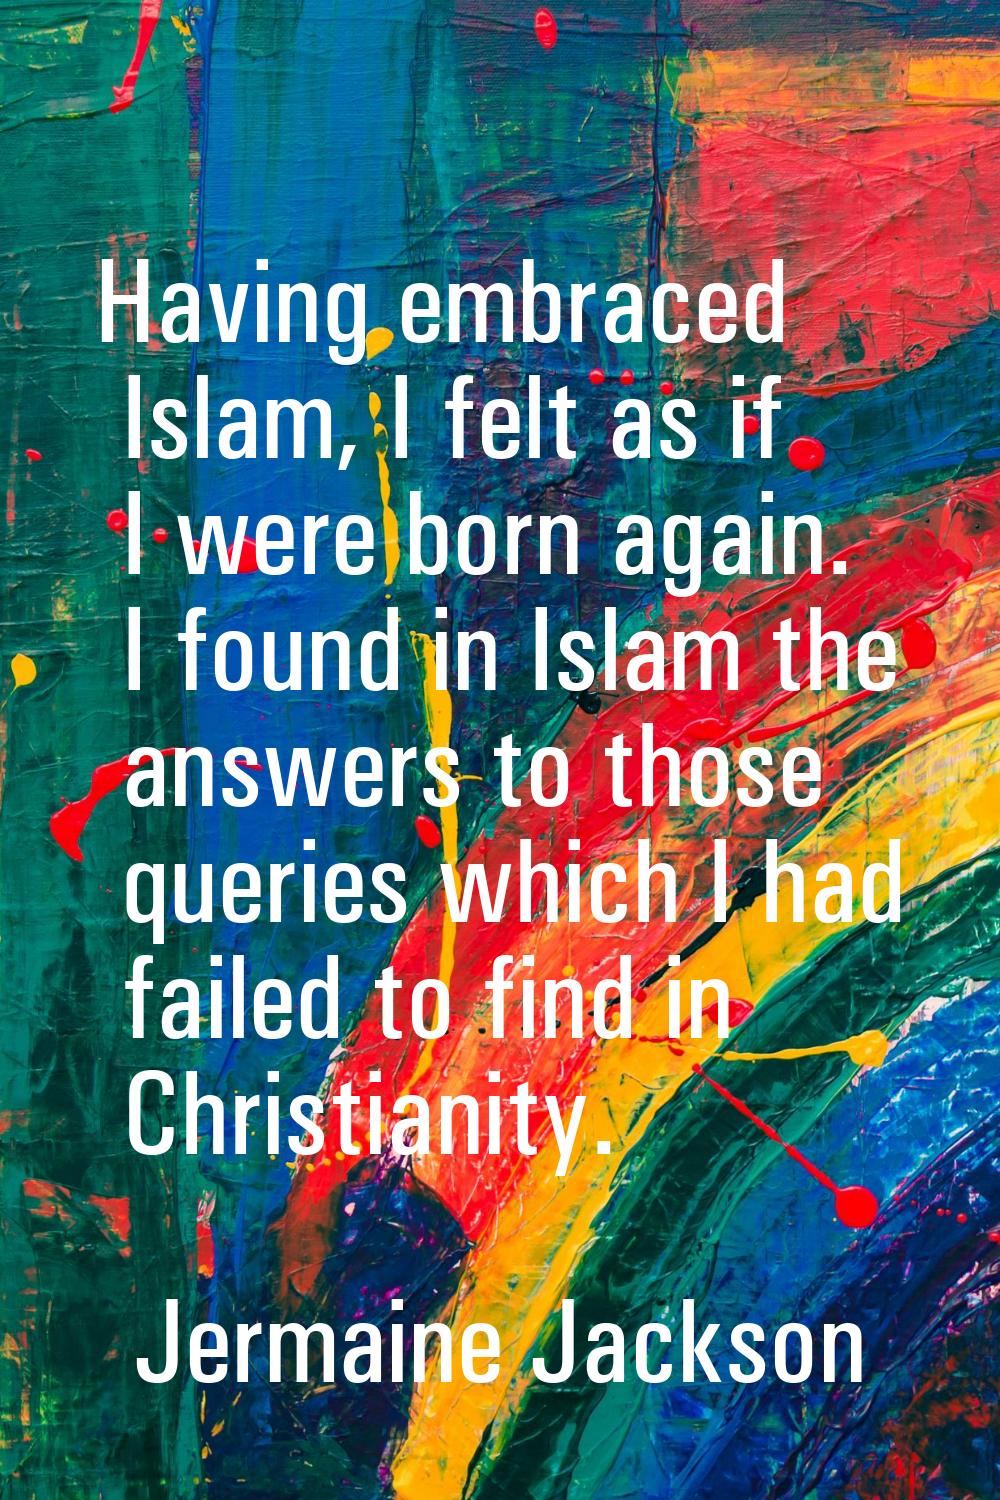 Having embraced Islam, I felt as if I were born again. I found in Islam the answers to those querie